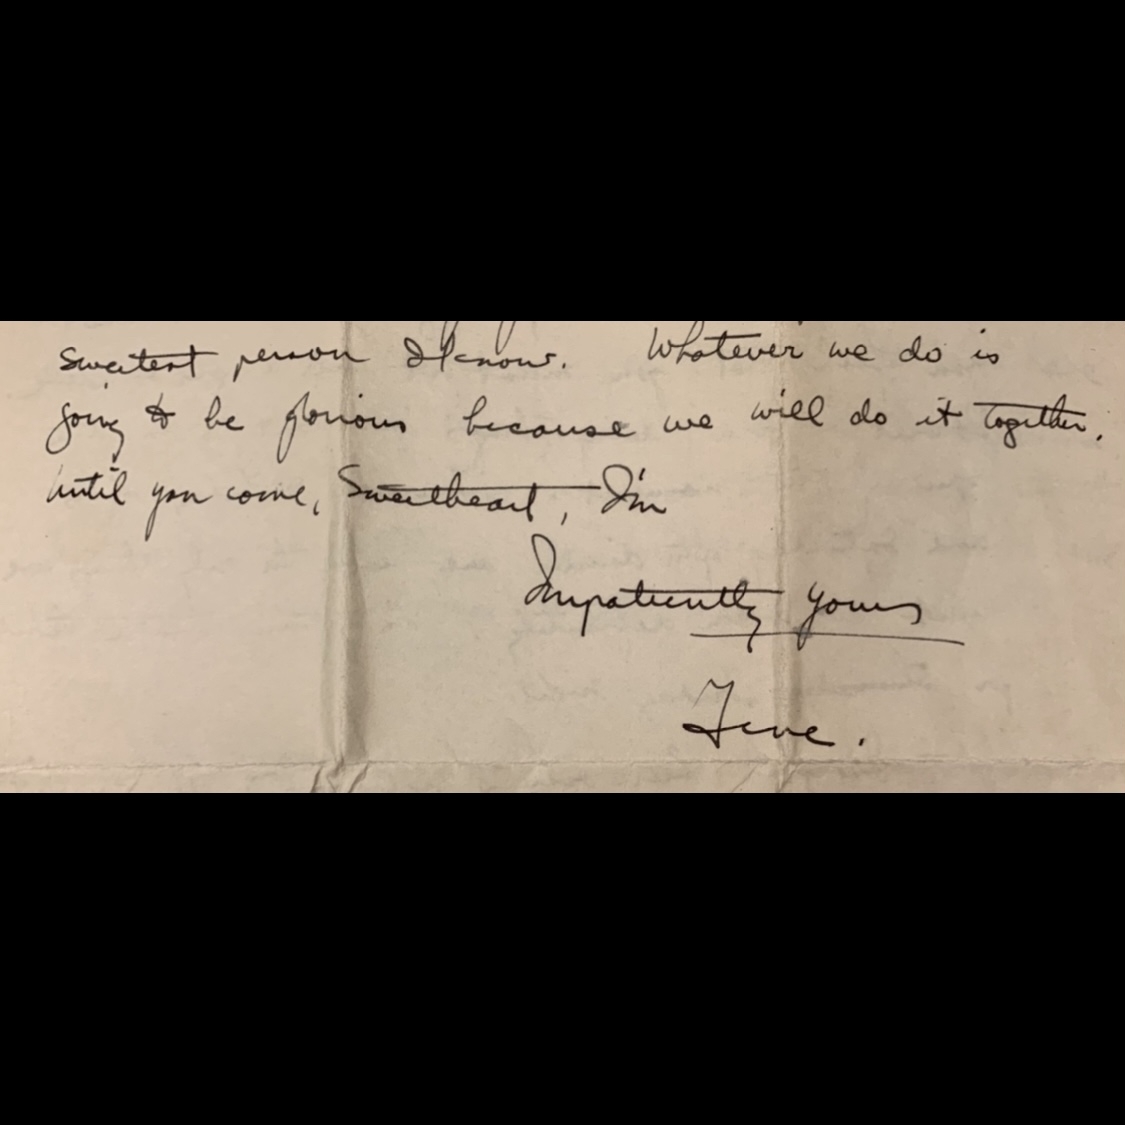 handwritten love letter from Eugene Exman to his future wife Gladys "Sunny" Miller during their engagement. He spends the letter bemoaning the obligations in New York that prevent him from going to see her sooner before signing off, "Impatiently Yours, Gene."